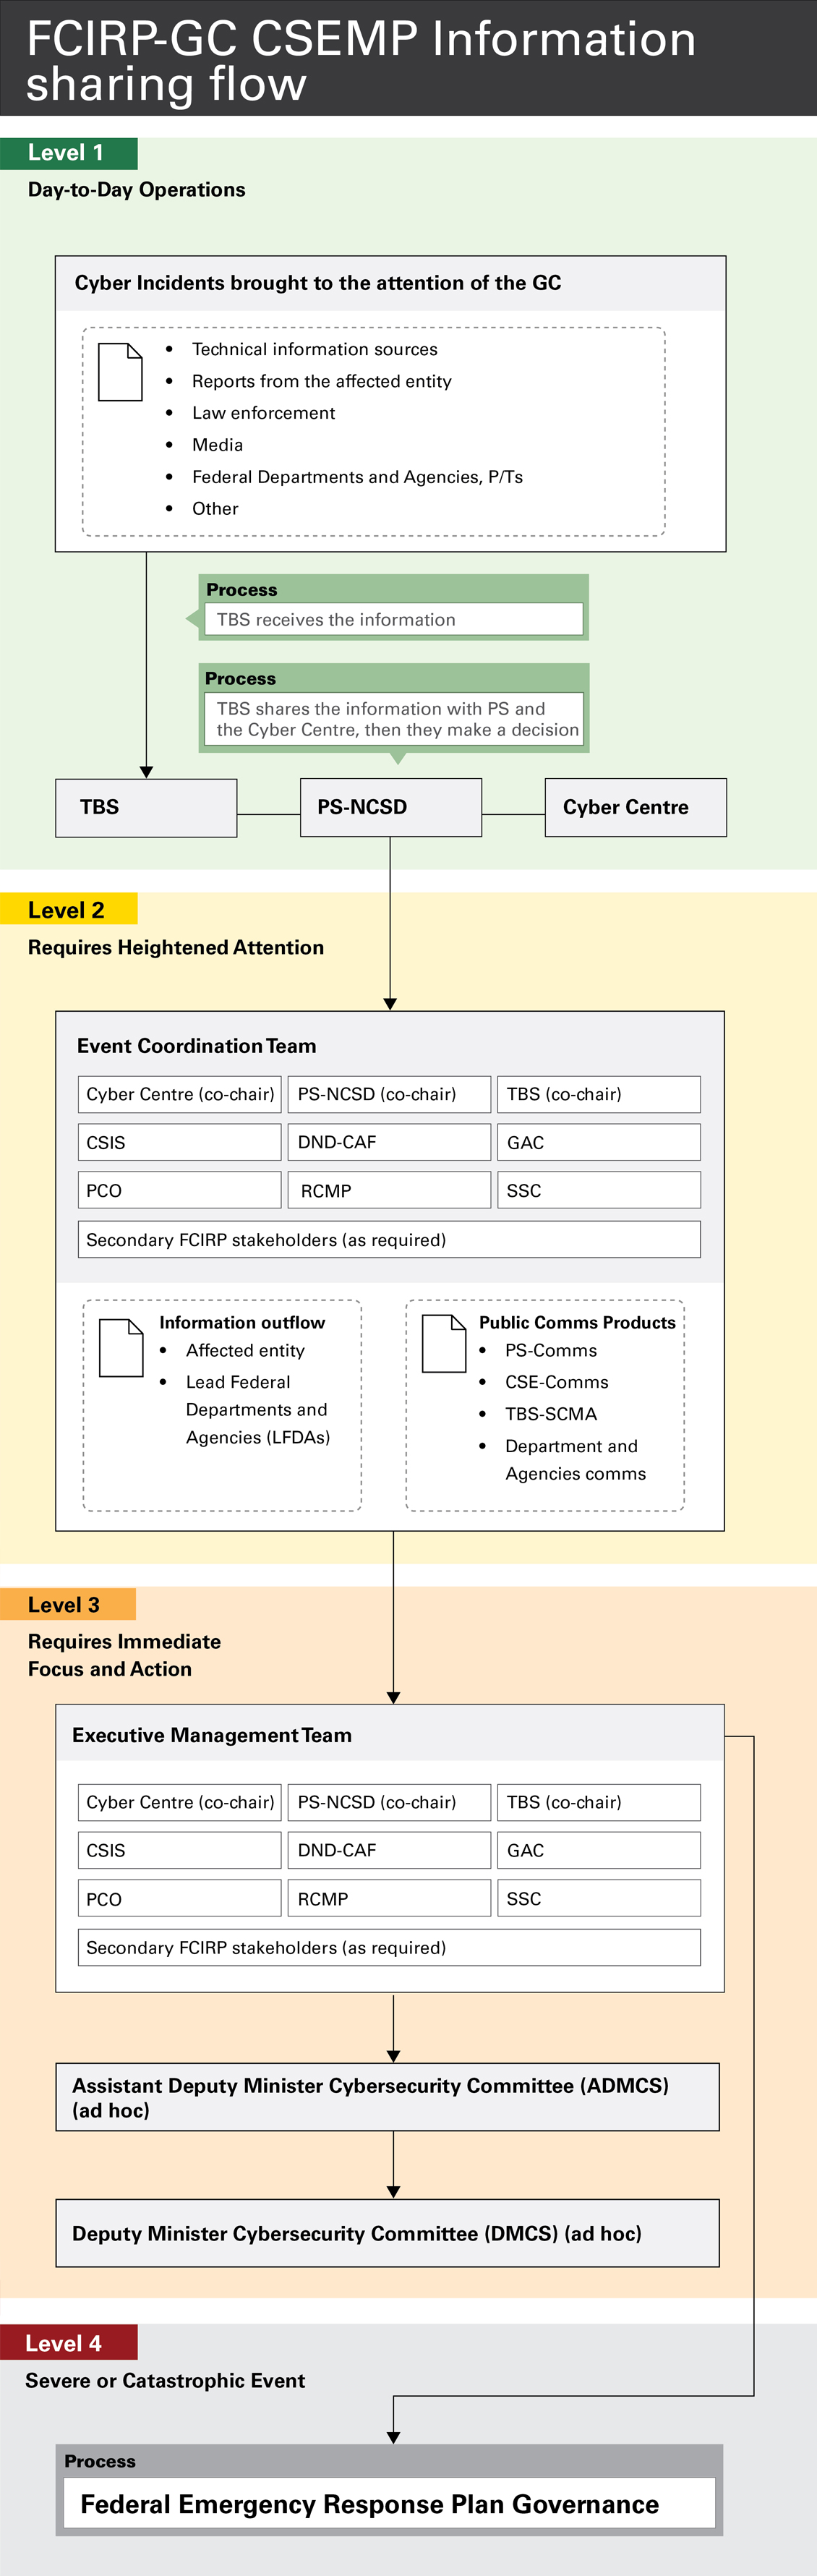 FCIRP and GC CSEMP Information Sharing Flow